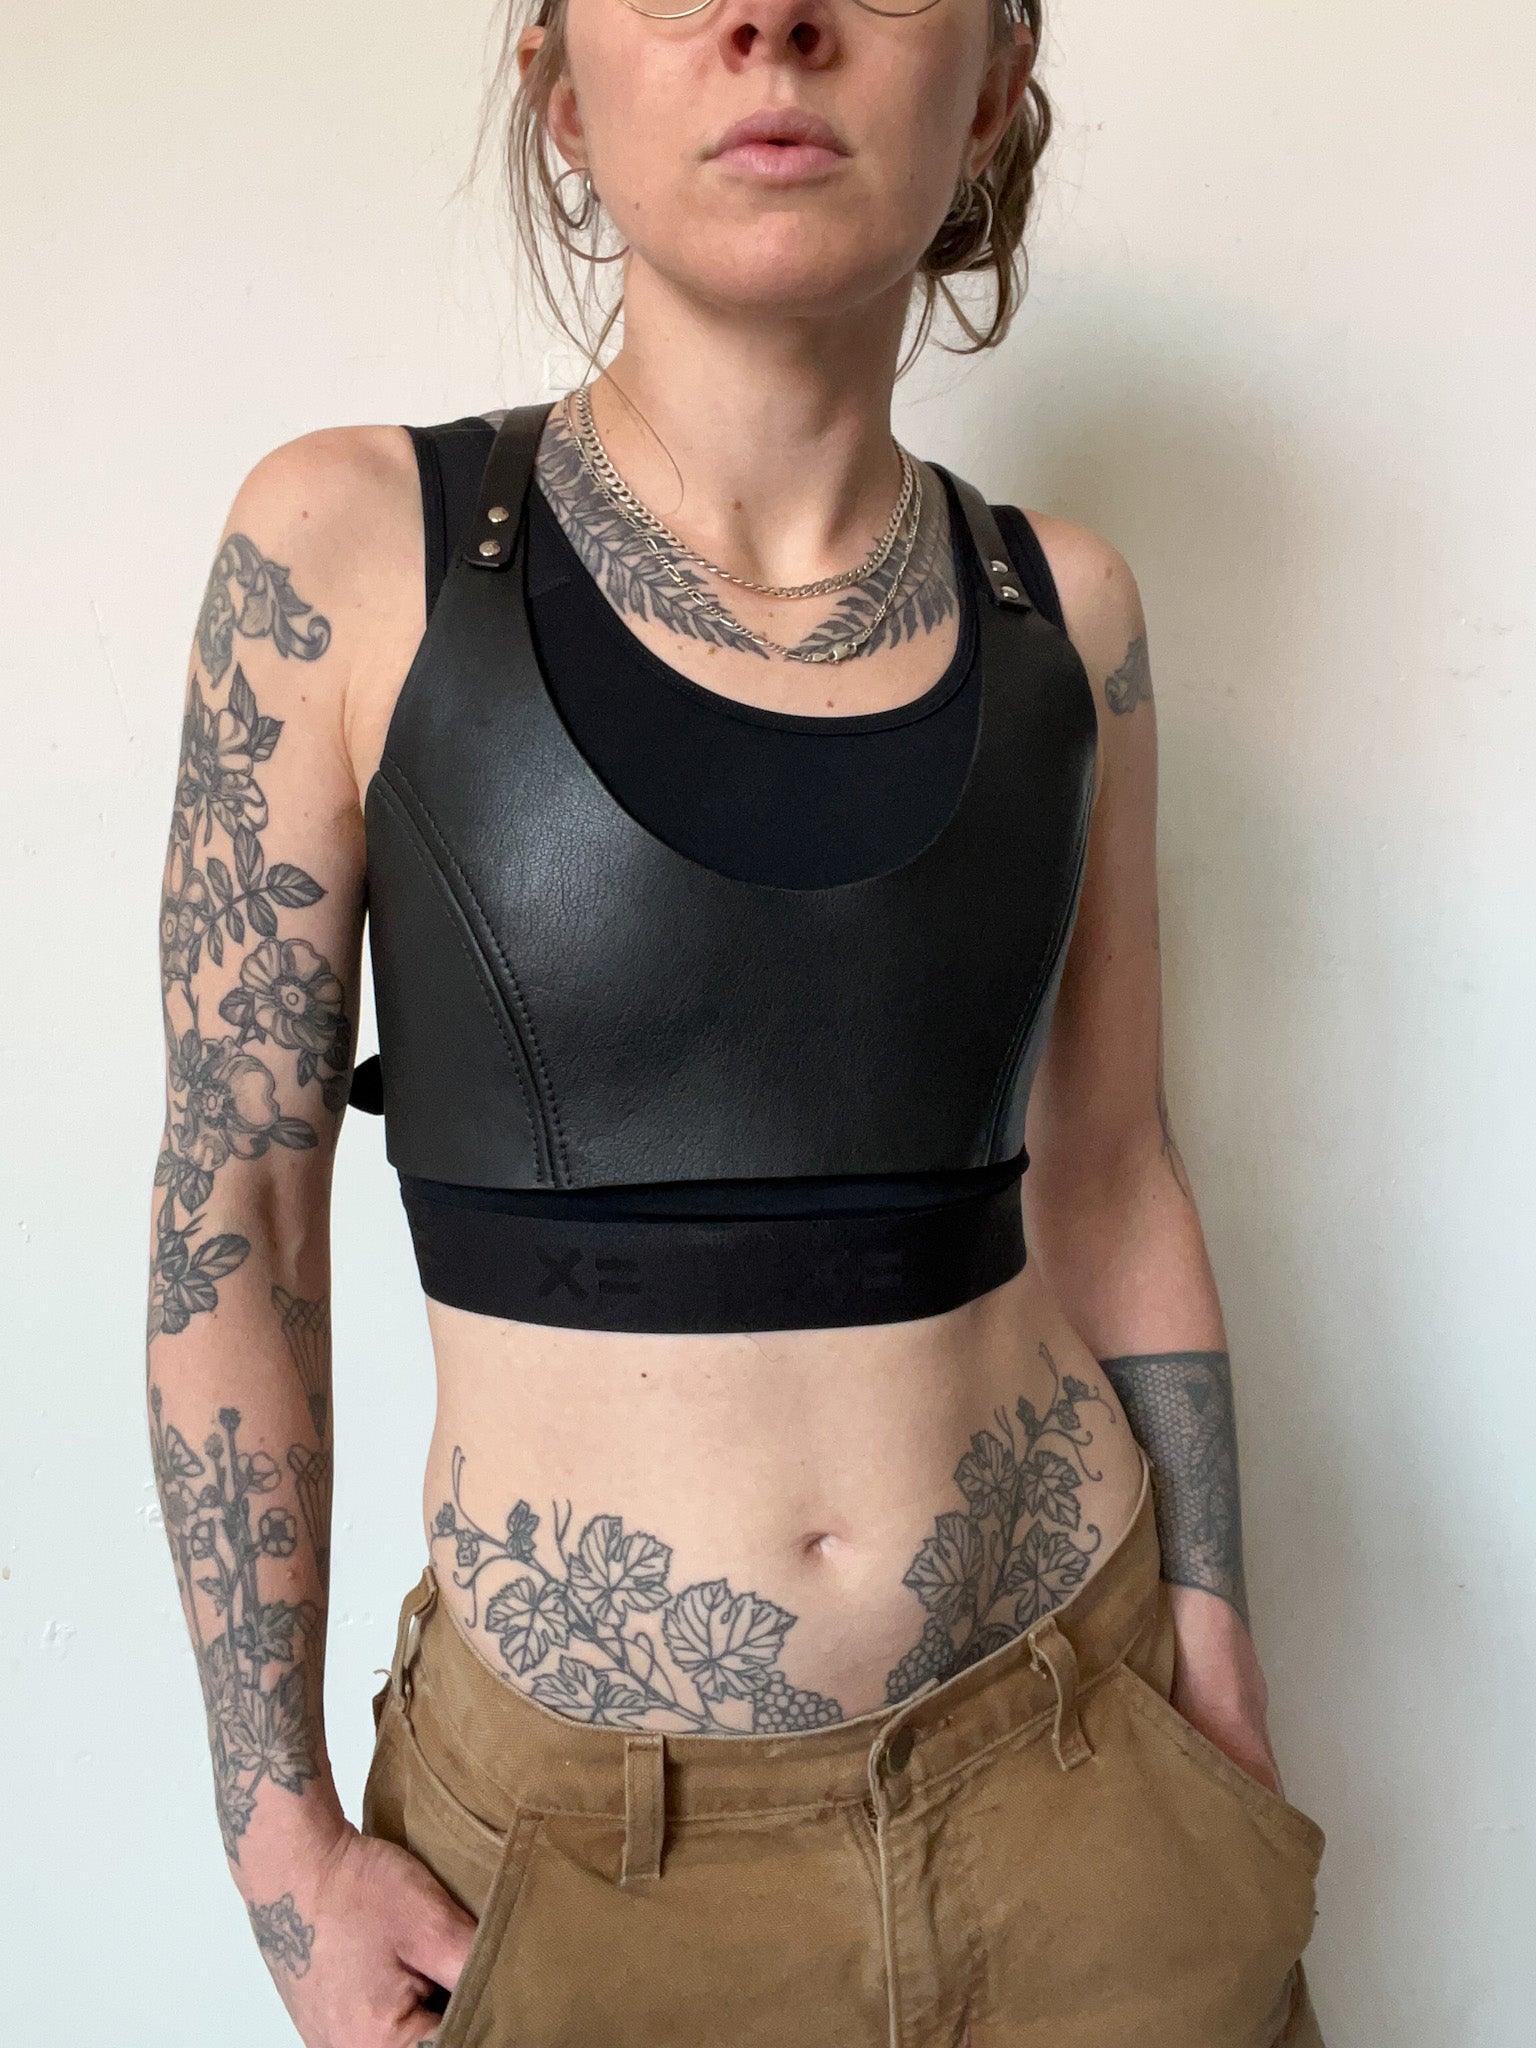 Leather Crop Top